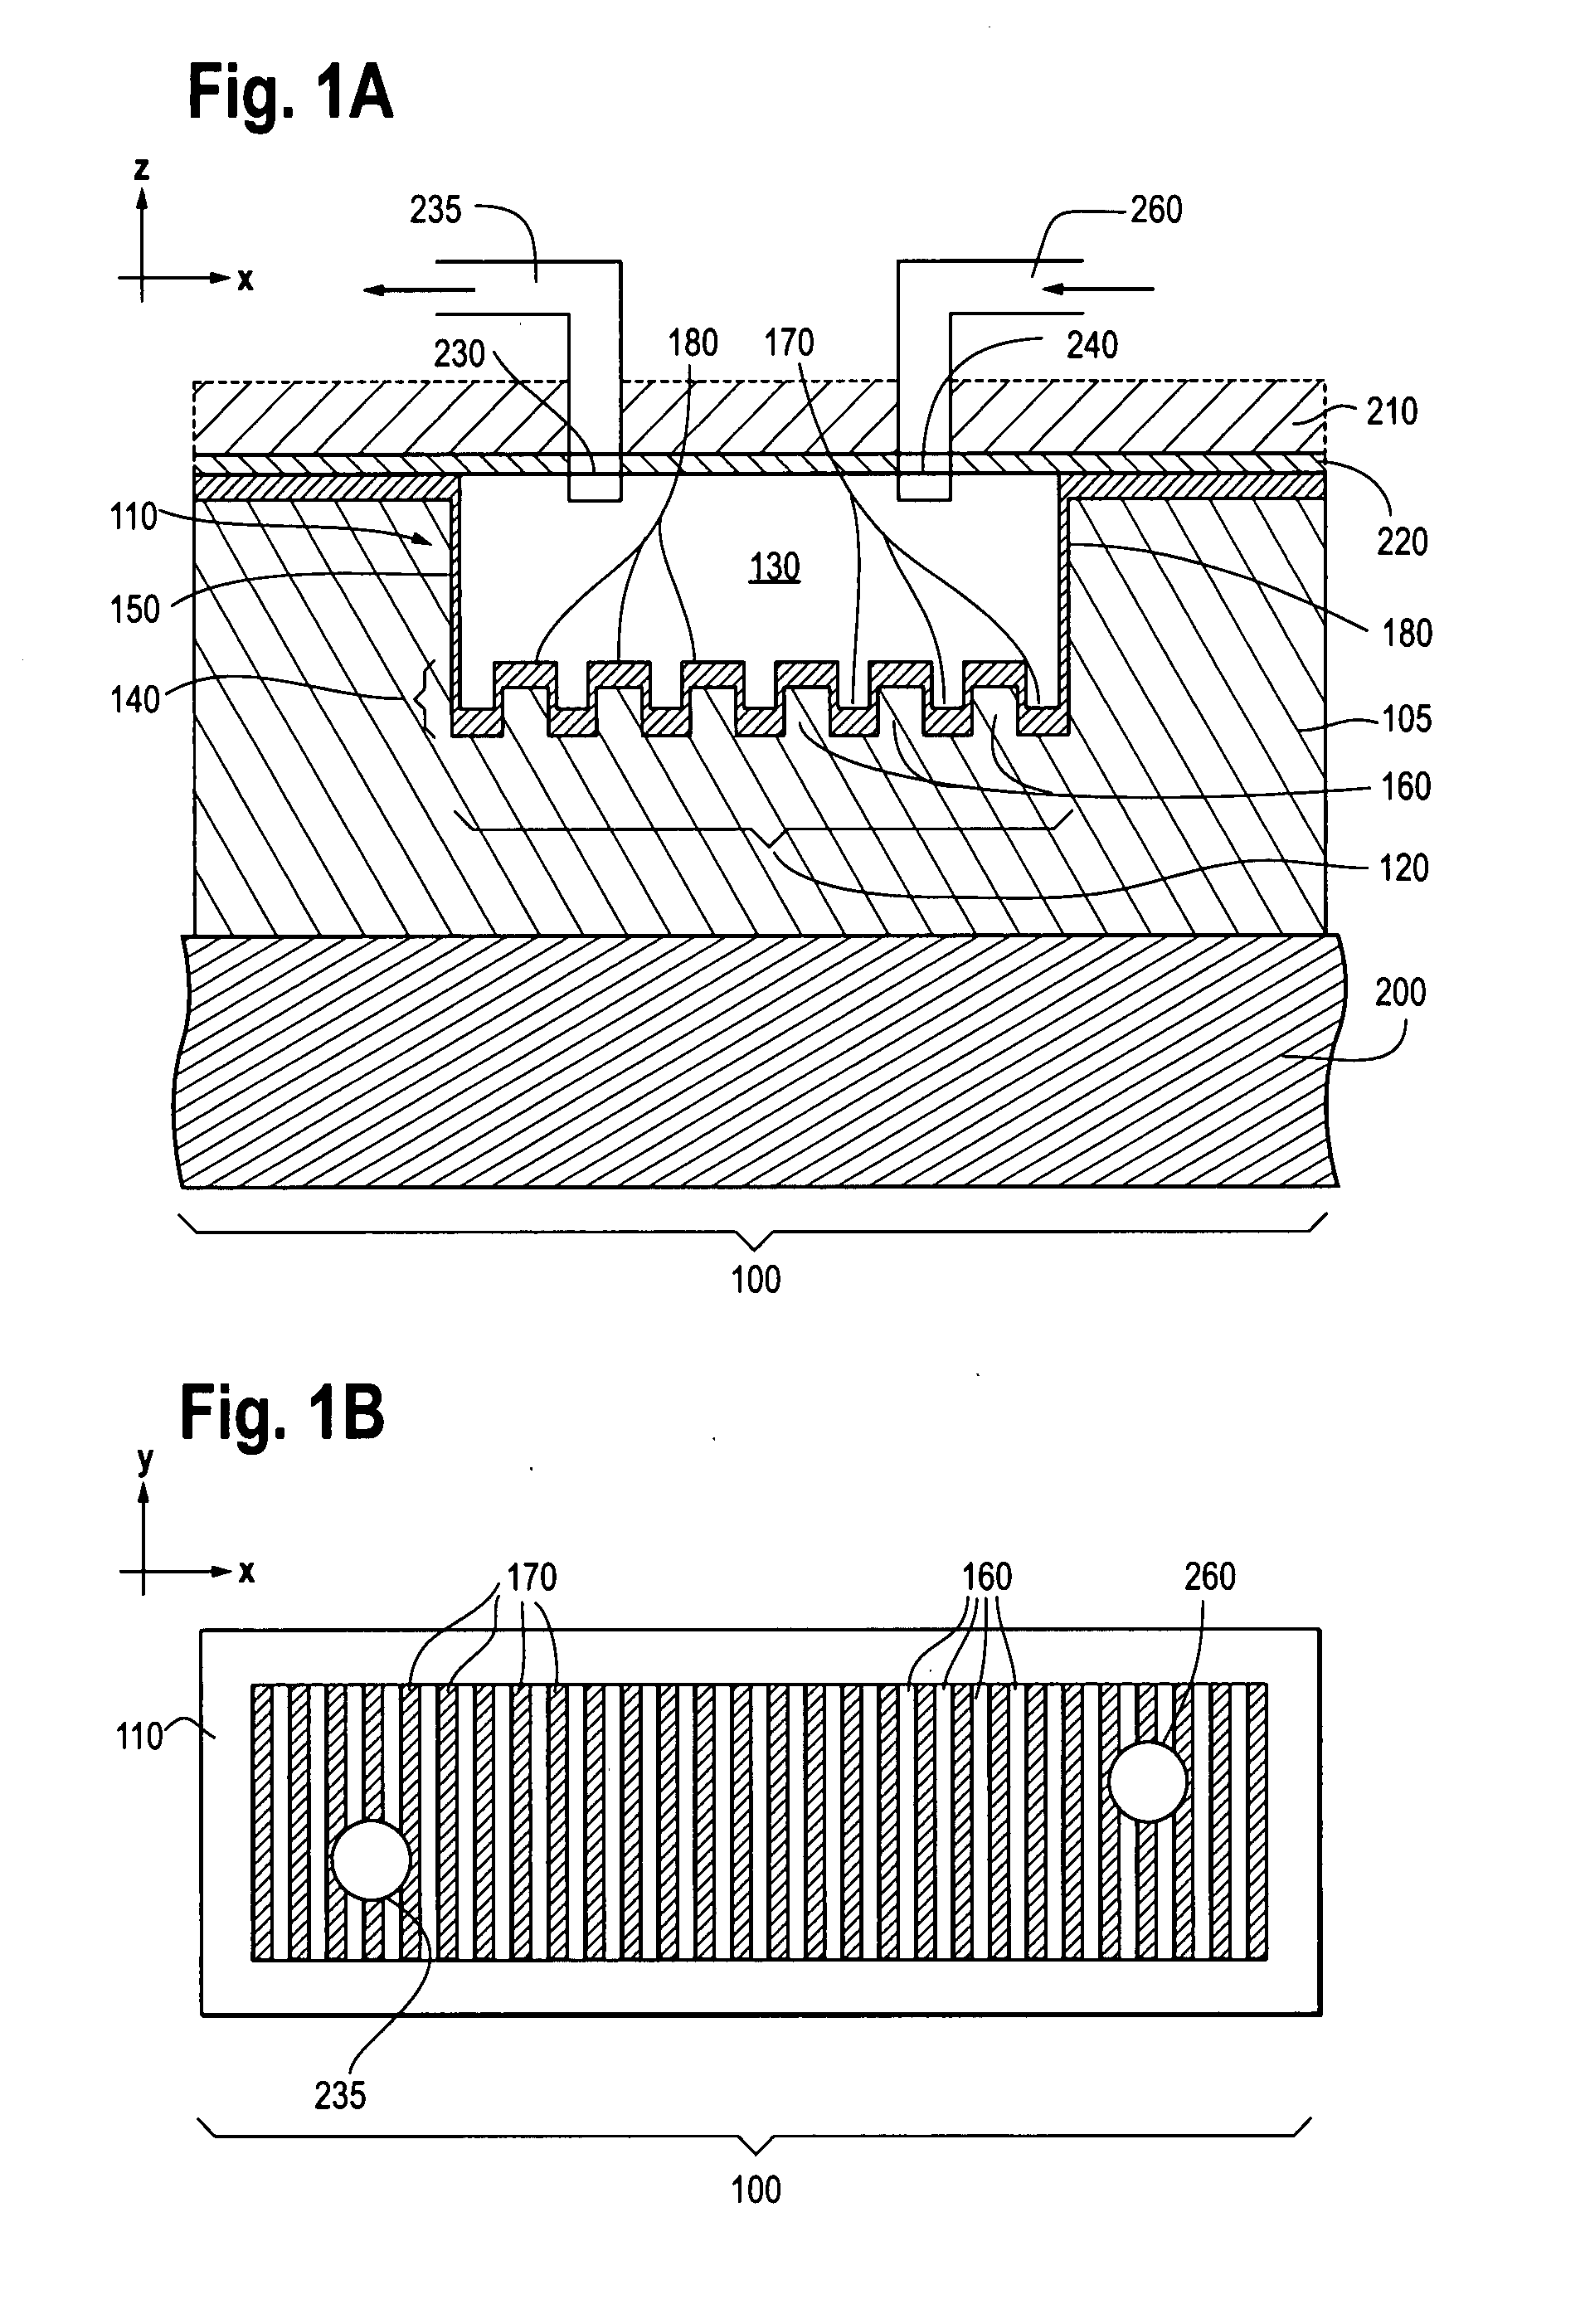 Photonic crystal sensors with intergrated fluid containment structure